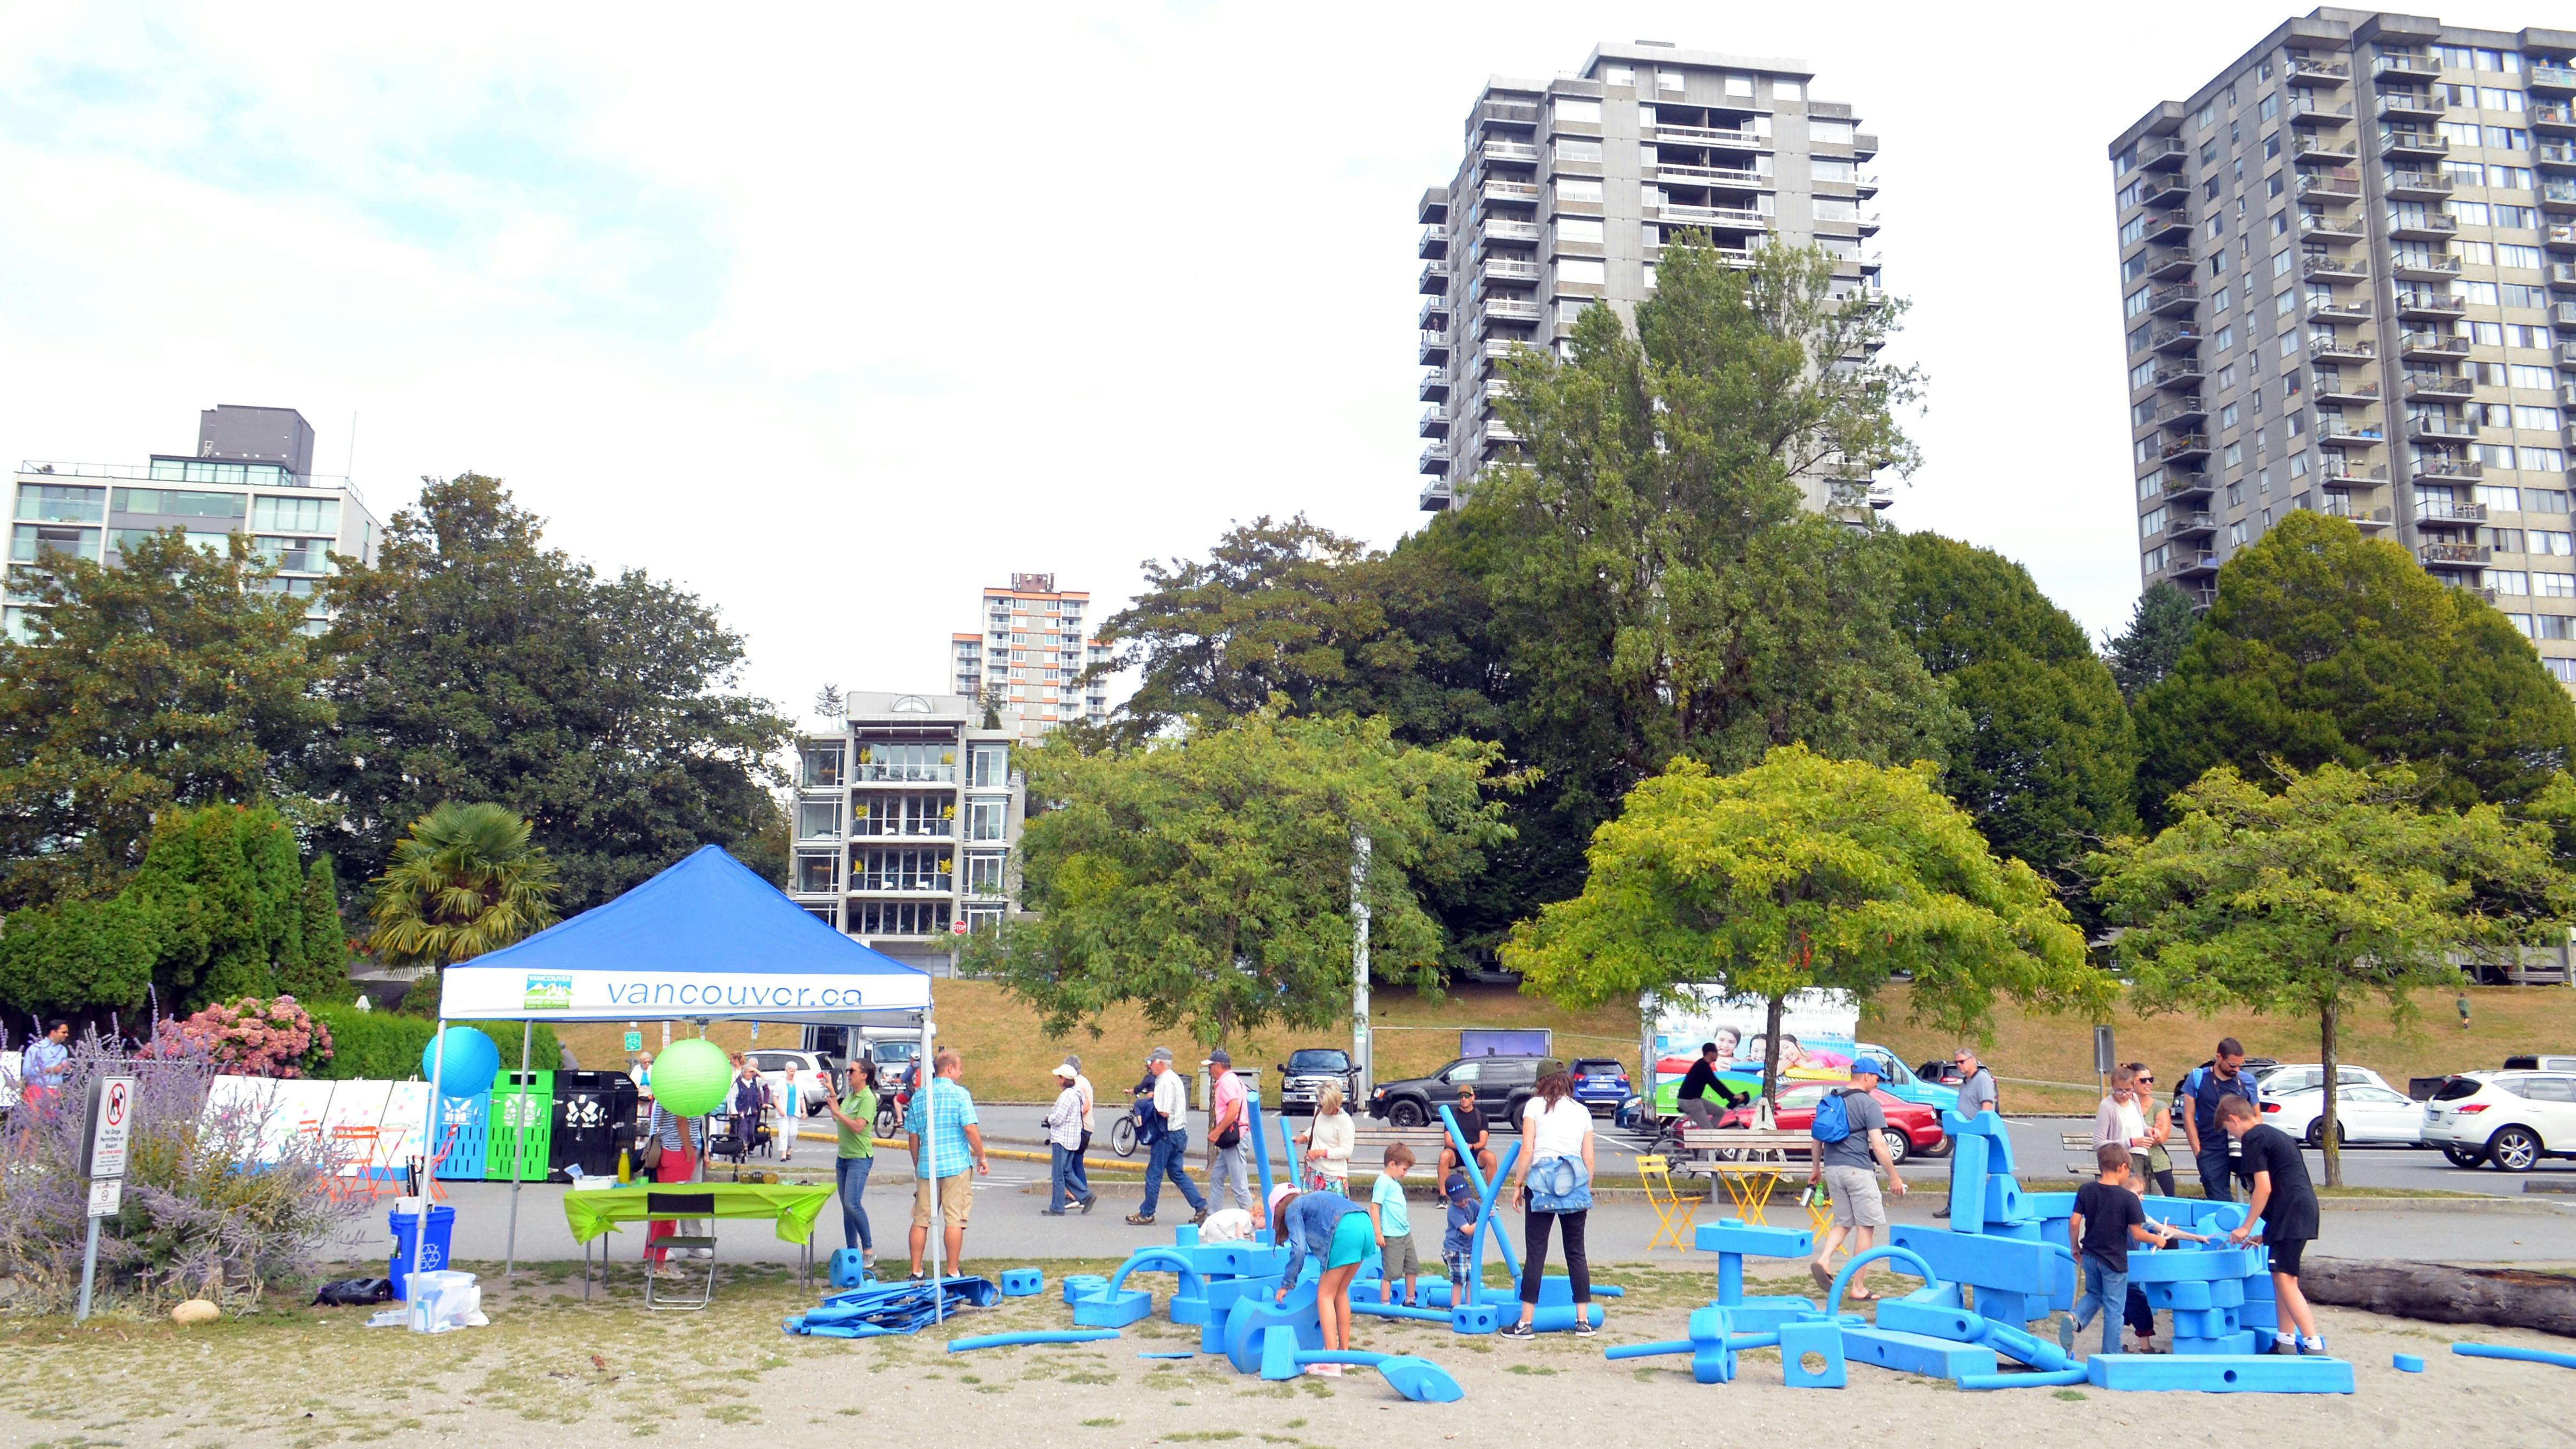 Pop-Up tent and bendable playground equipment at Sunset Beach Park